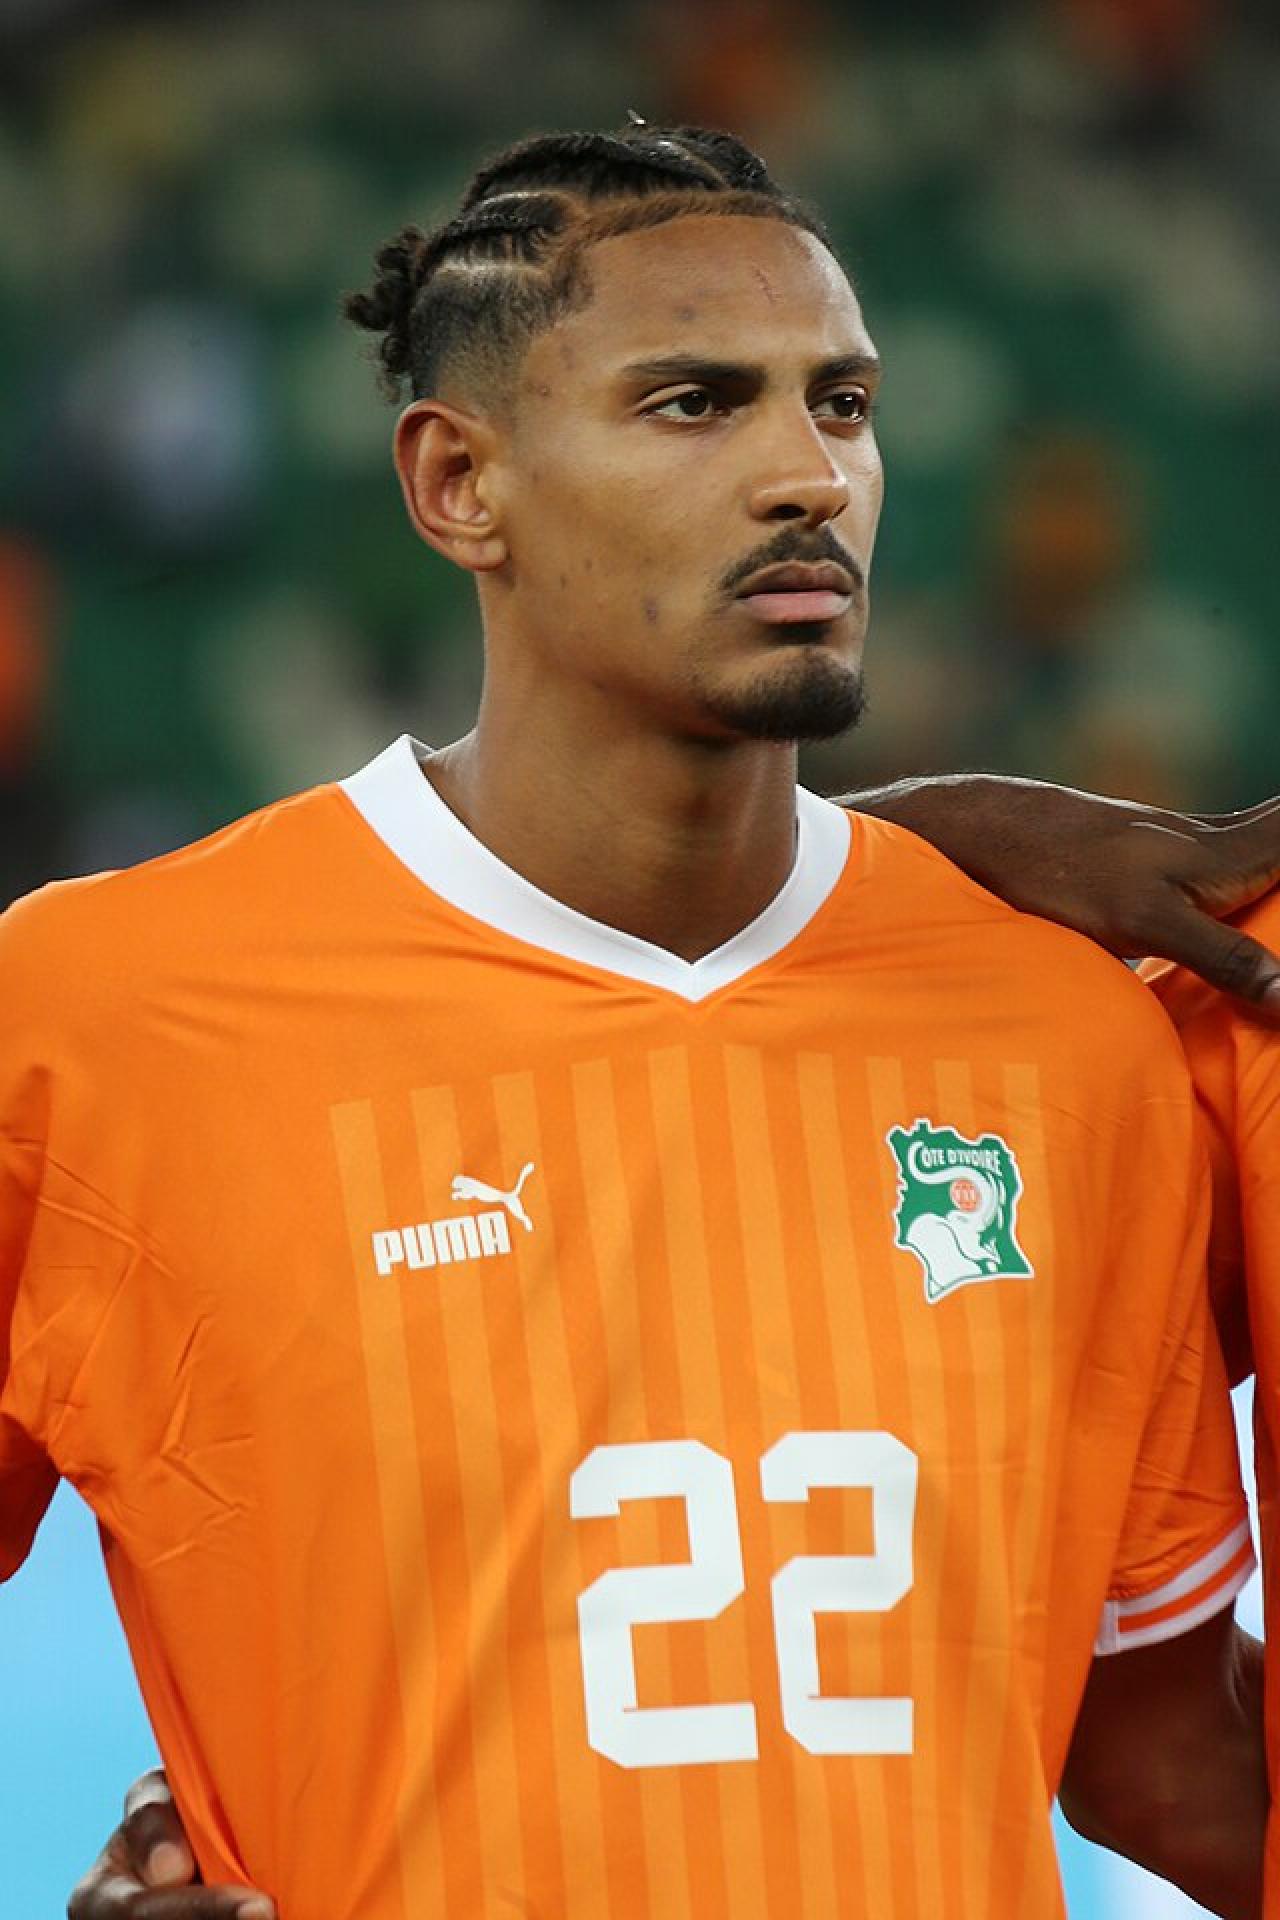 Haller linked with lucrative move to Mexico